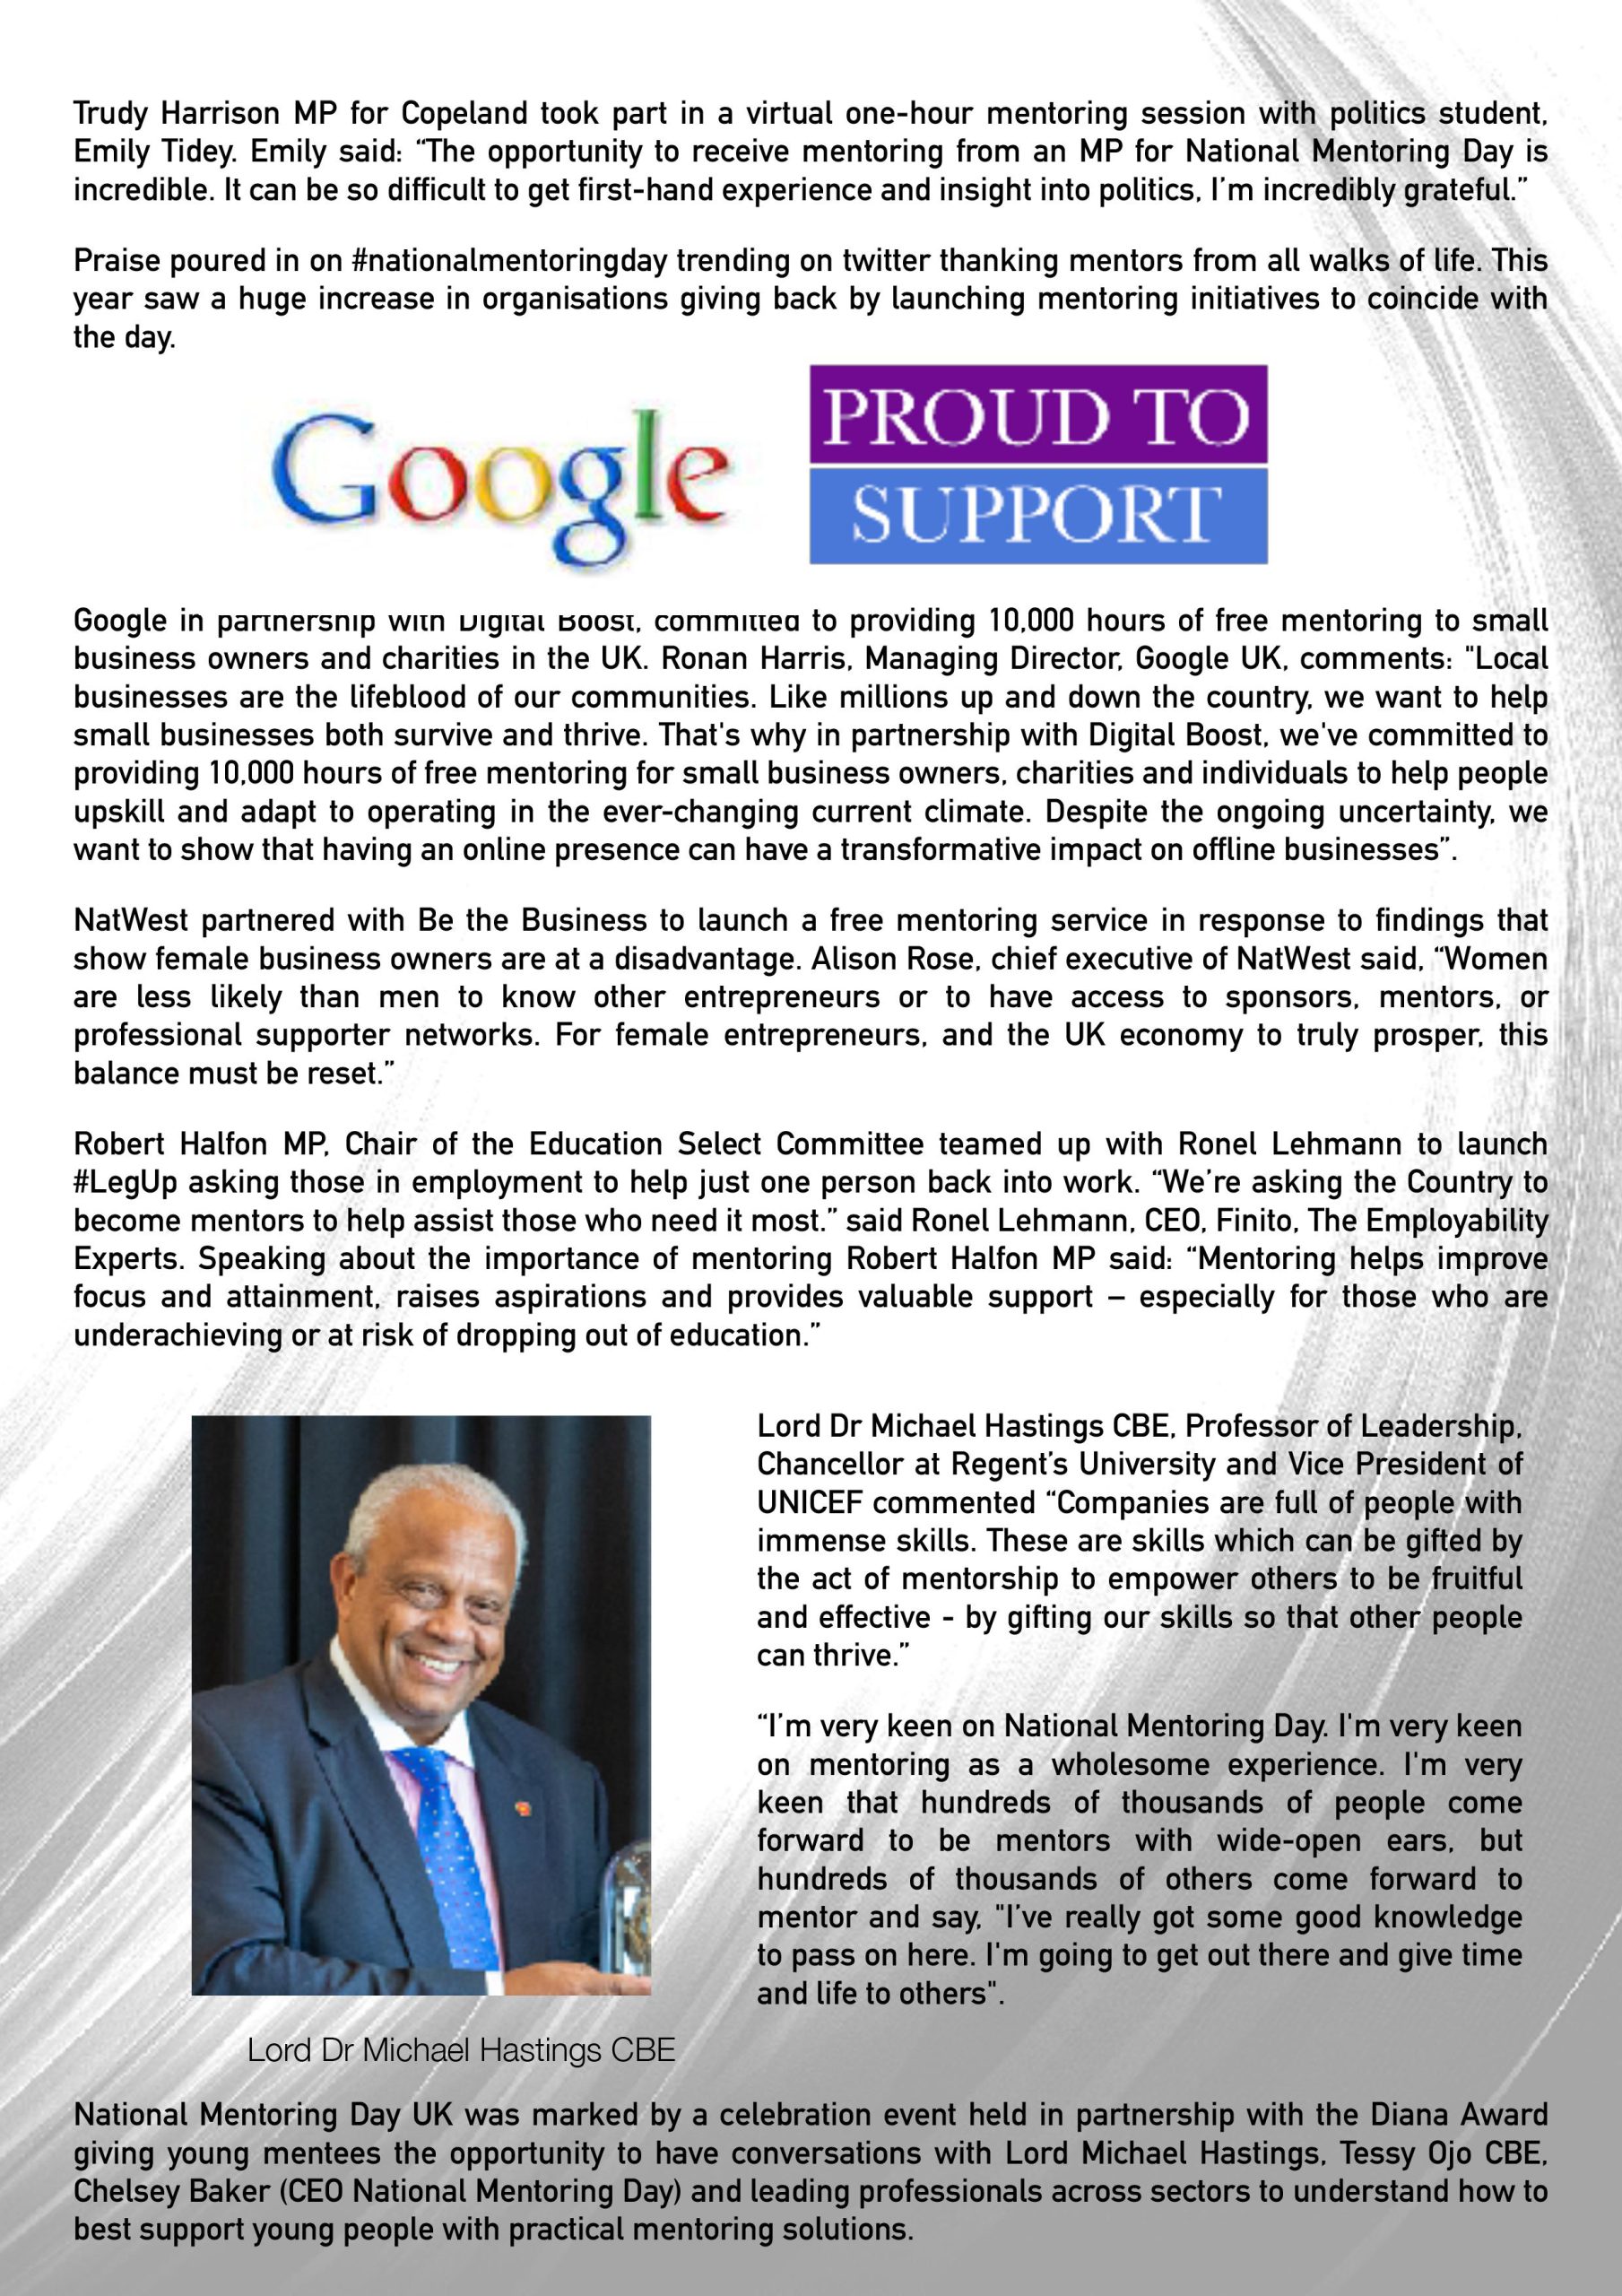 Press Coverage - Google Promise 10,000 Hours of Mentoring